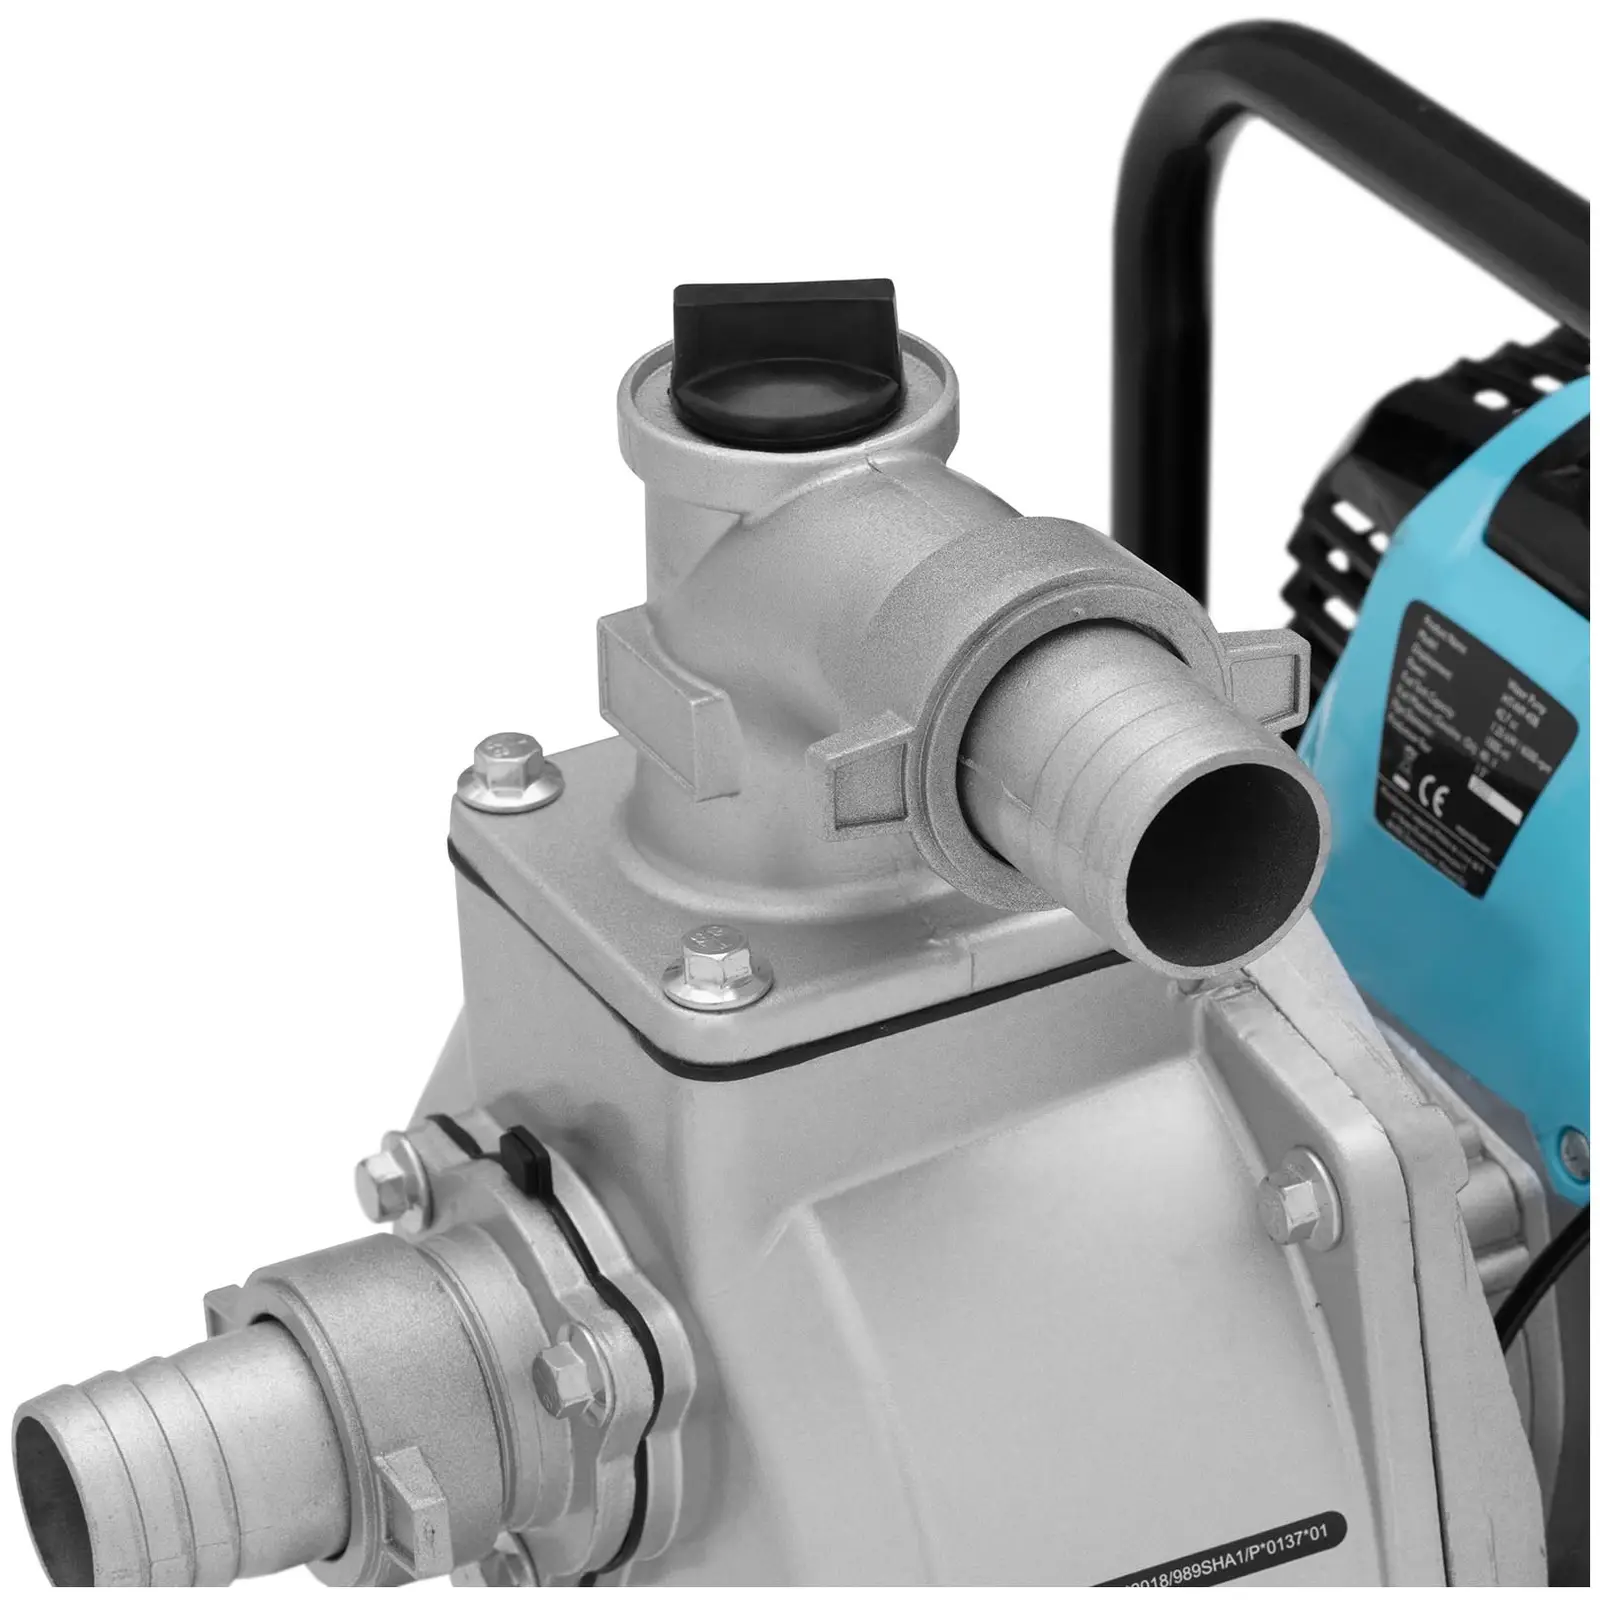 Water pump - 1.2 kW - 15 m³/h - with flat hose - 1 1/2" - 20 m - 0 - 7 bar